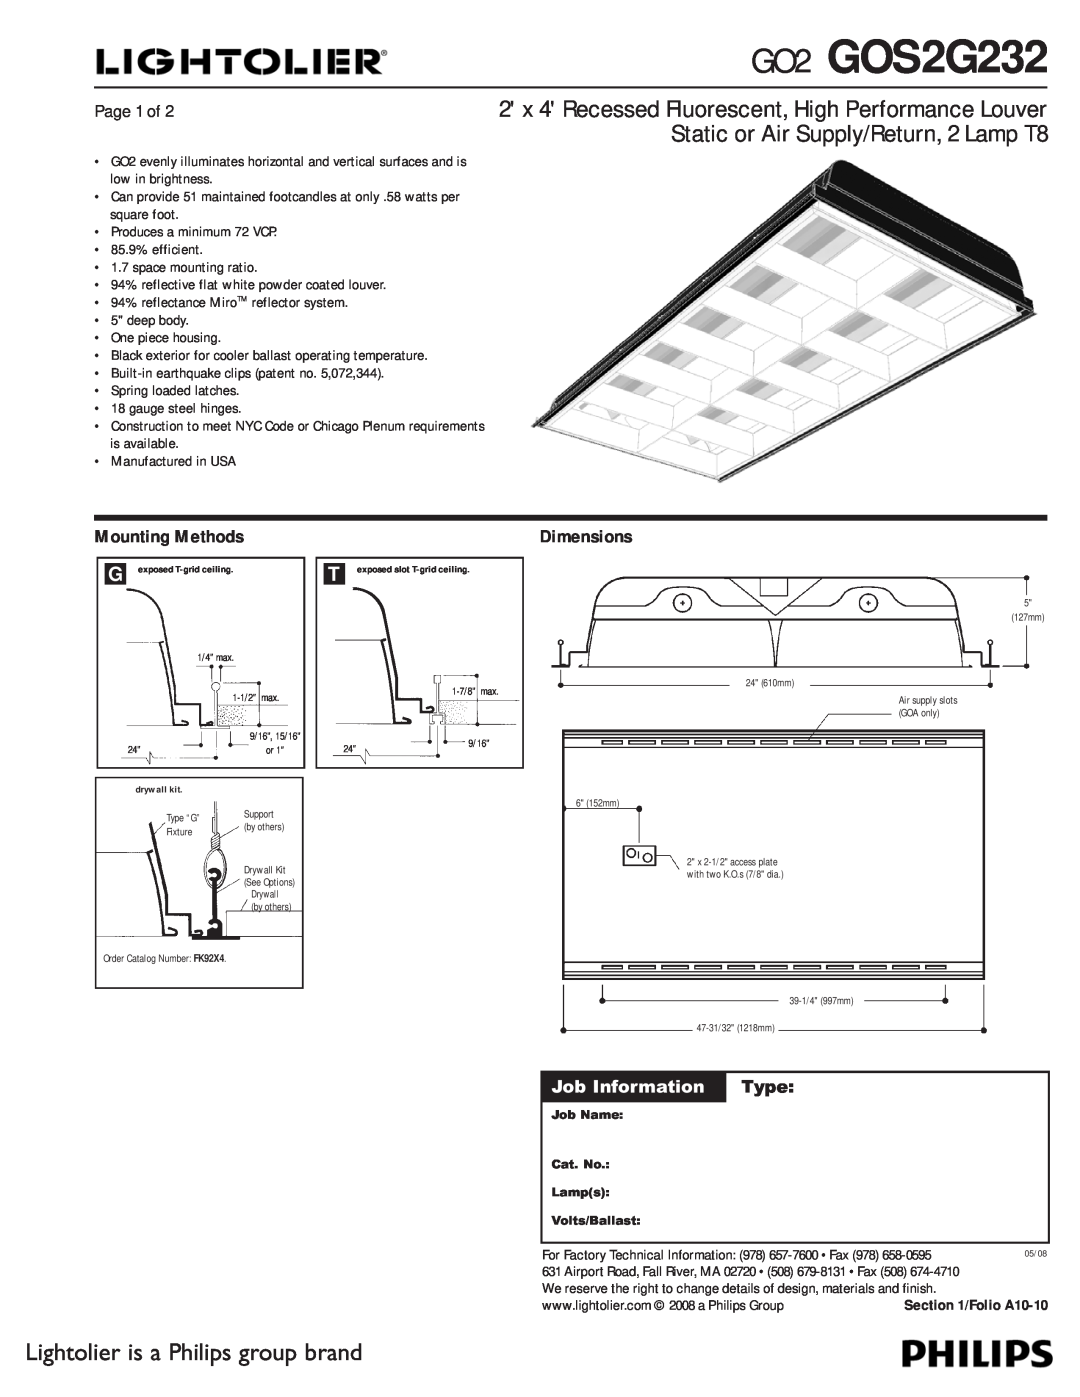 Lightolier dimensions GO2 GOS2G232, Lightolier is a Philips group brand, Mounting Methods, Dimensions, Page 1 of, Type 